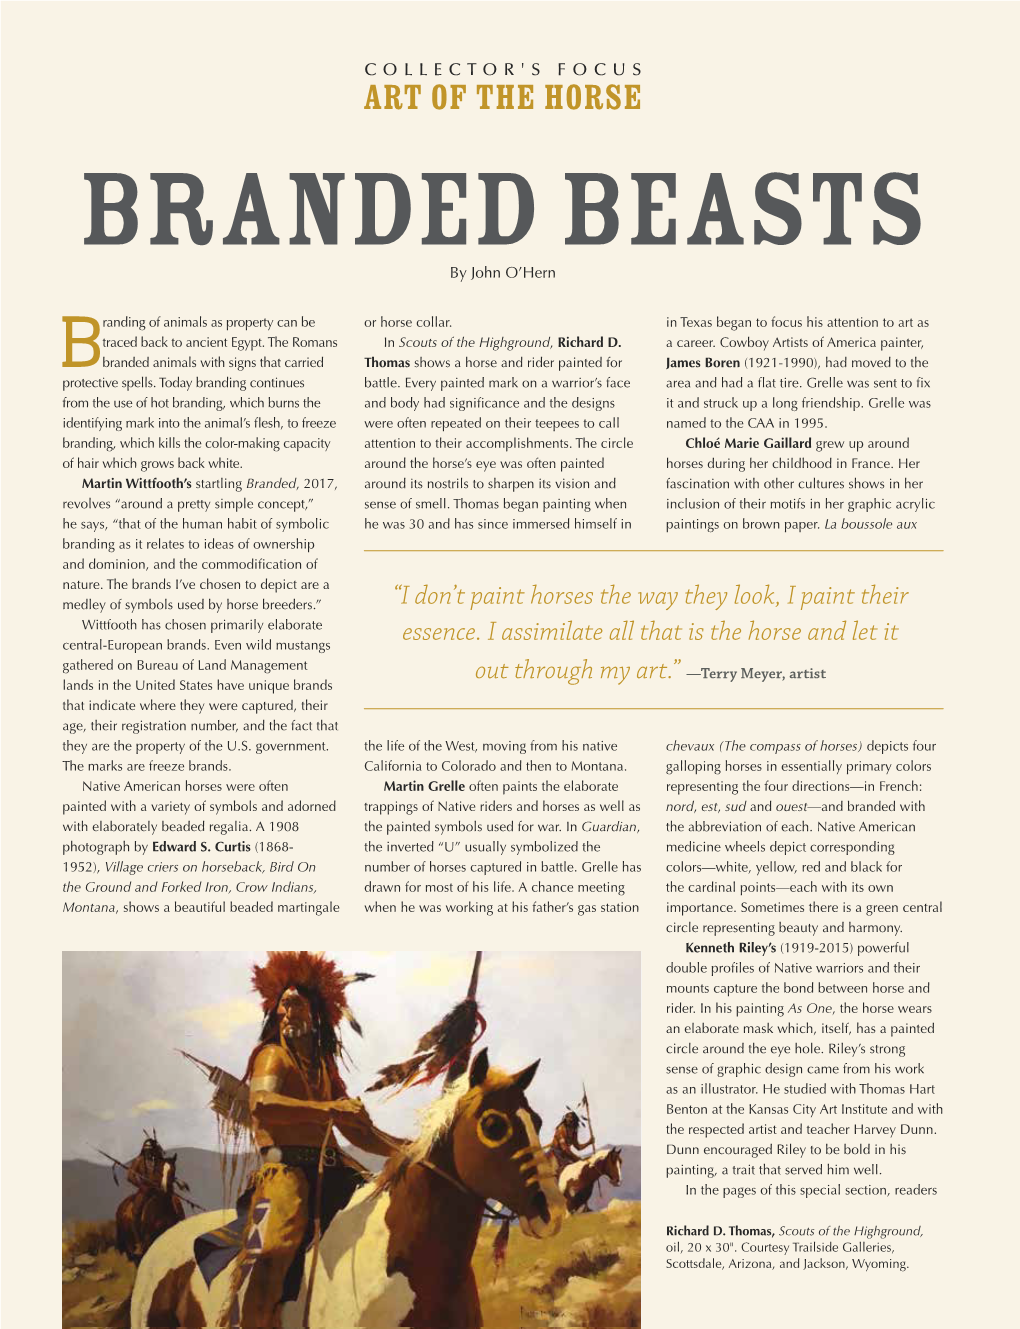 ART of the HORSE BRANDED BEASTS by John O’Hern